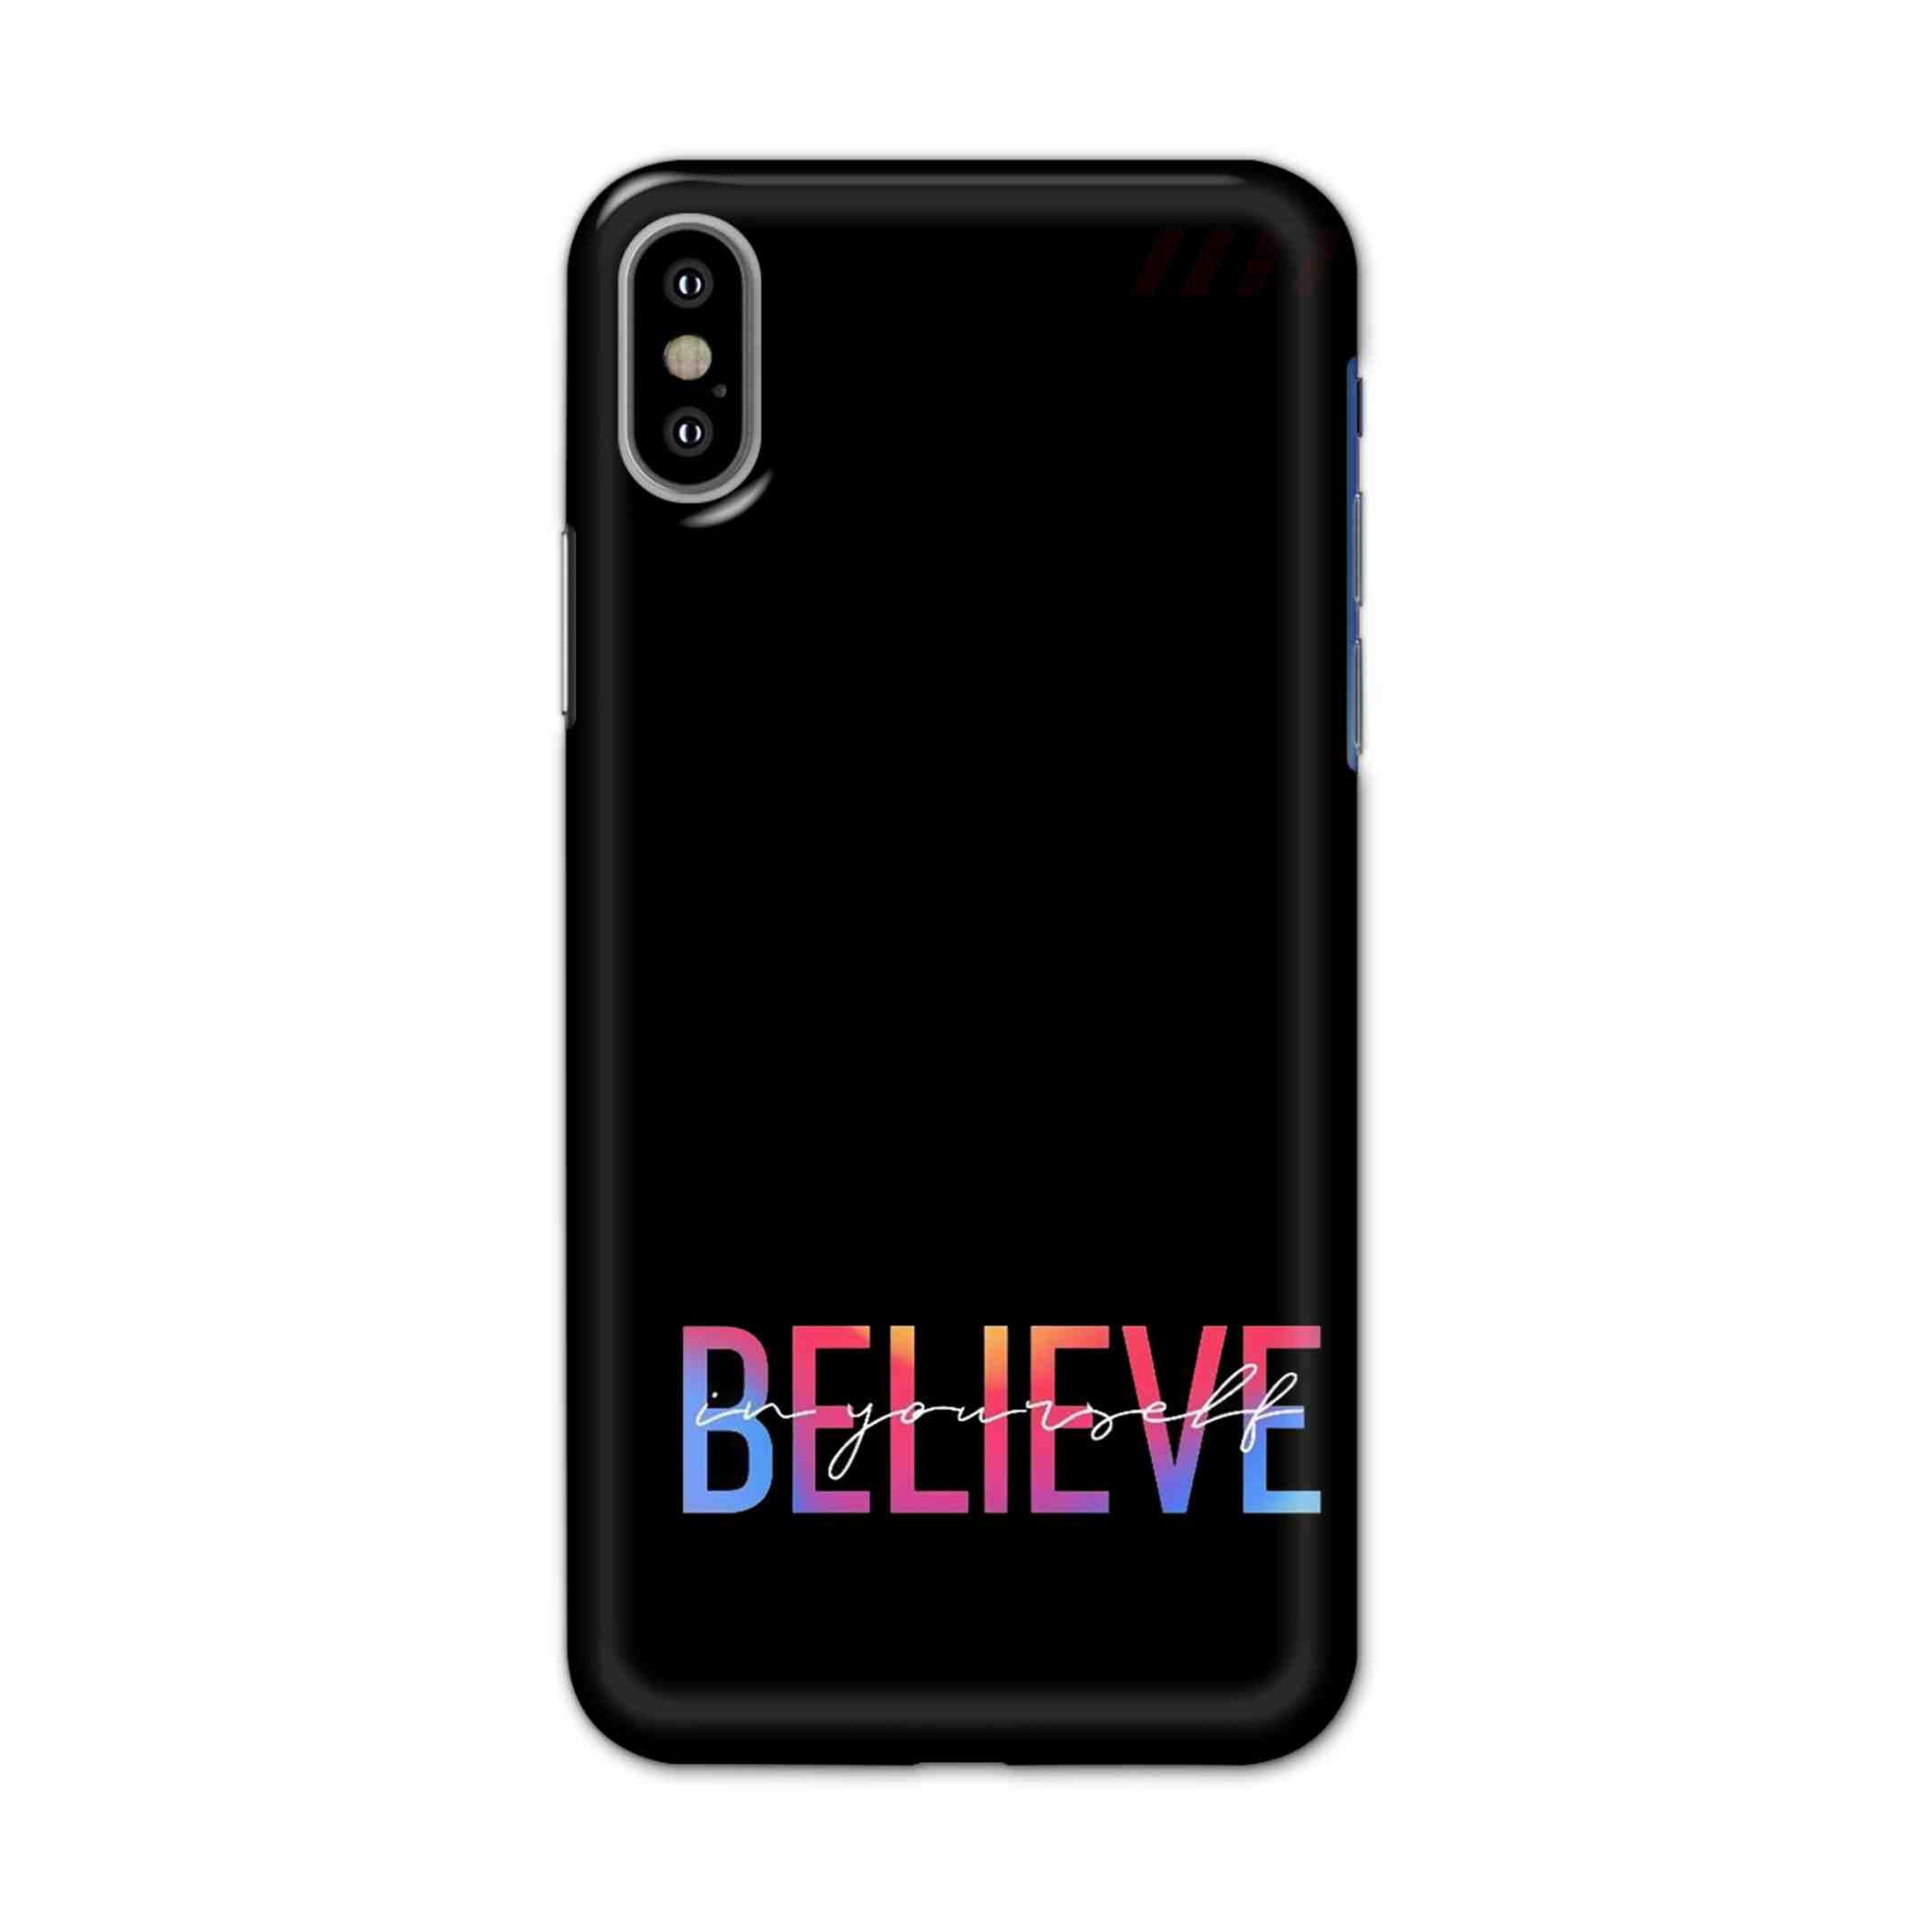 Buy Believe Hard Back Mobile Phone Case/Cover For iPhone X Online